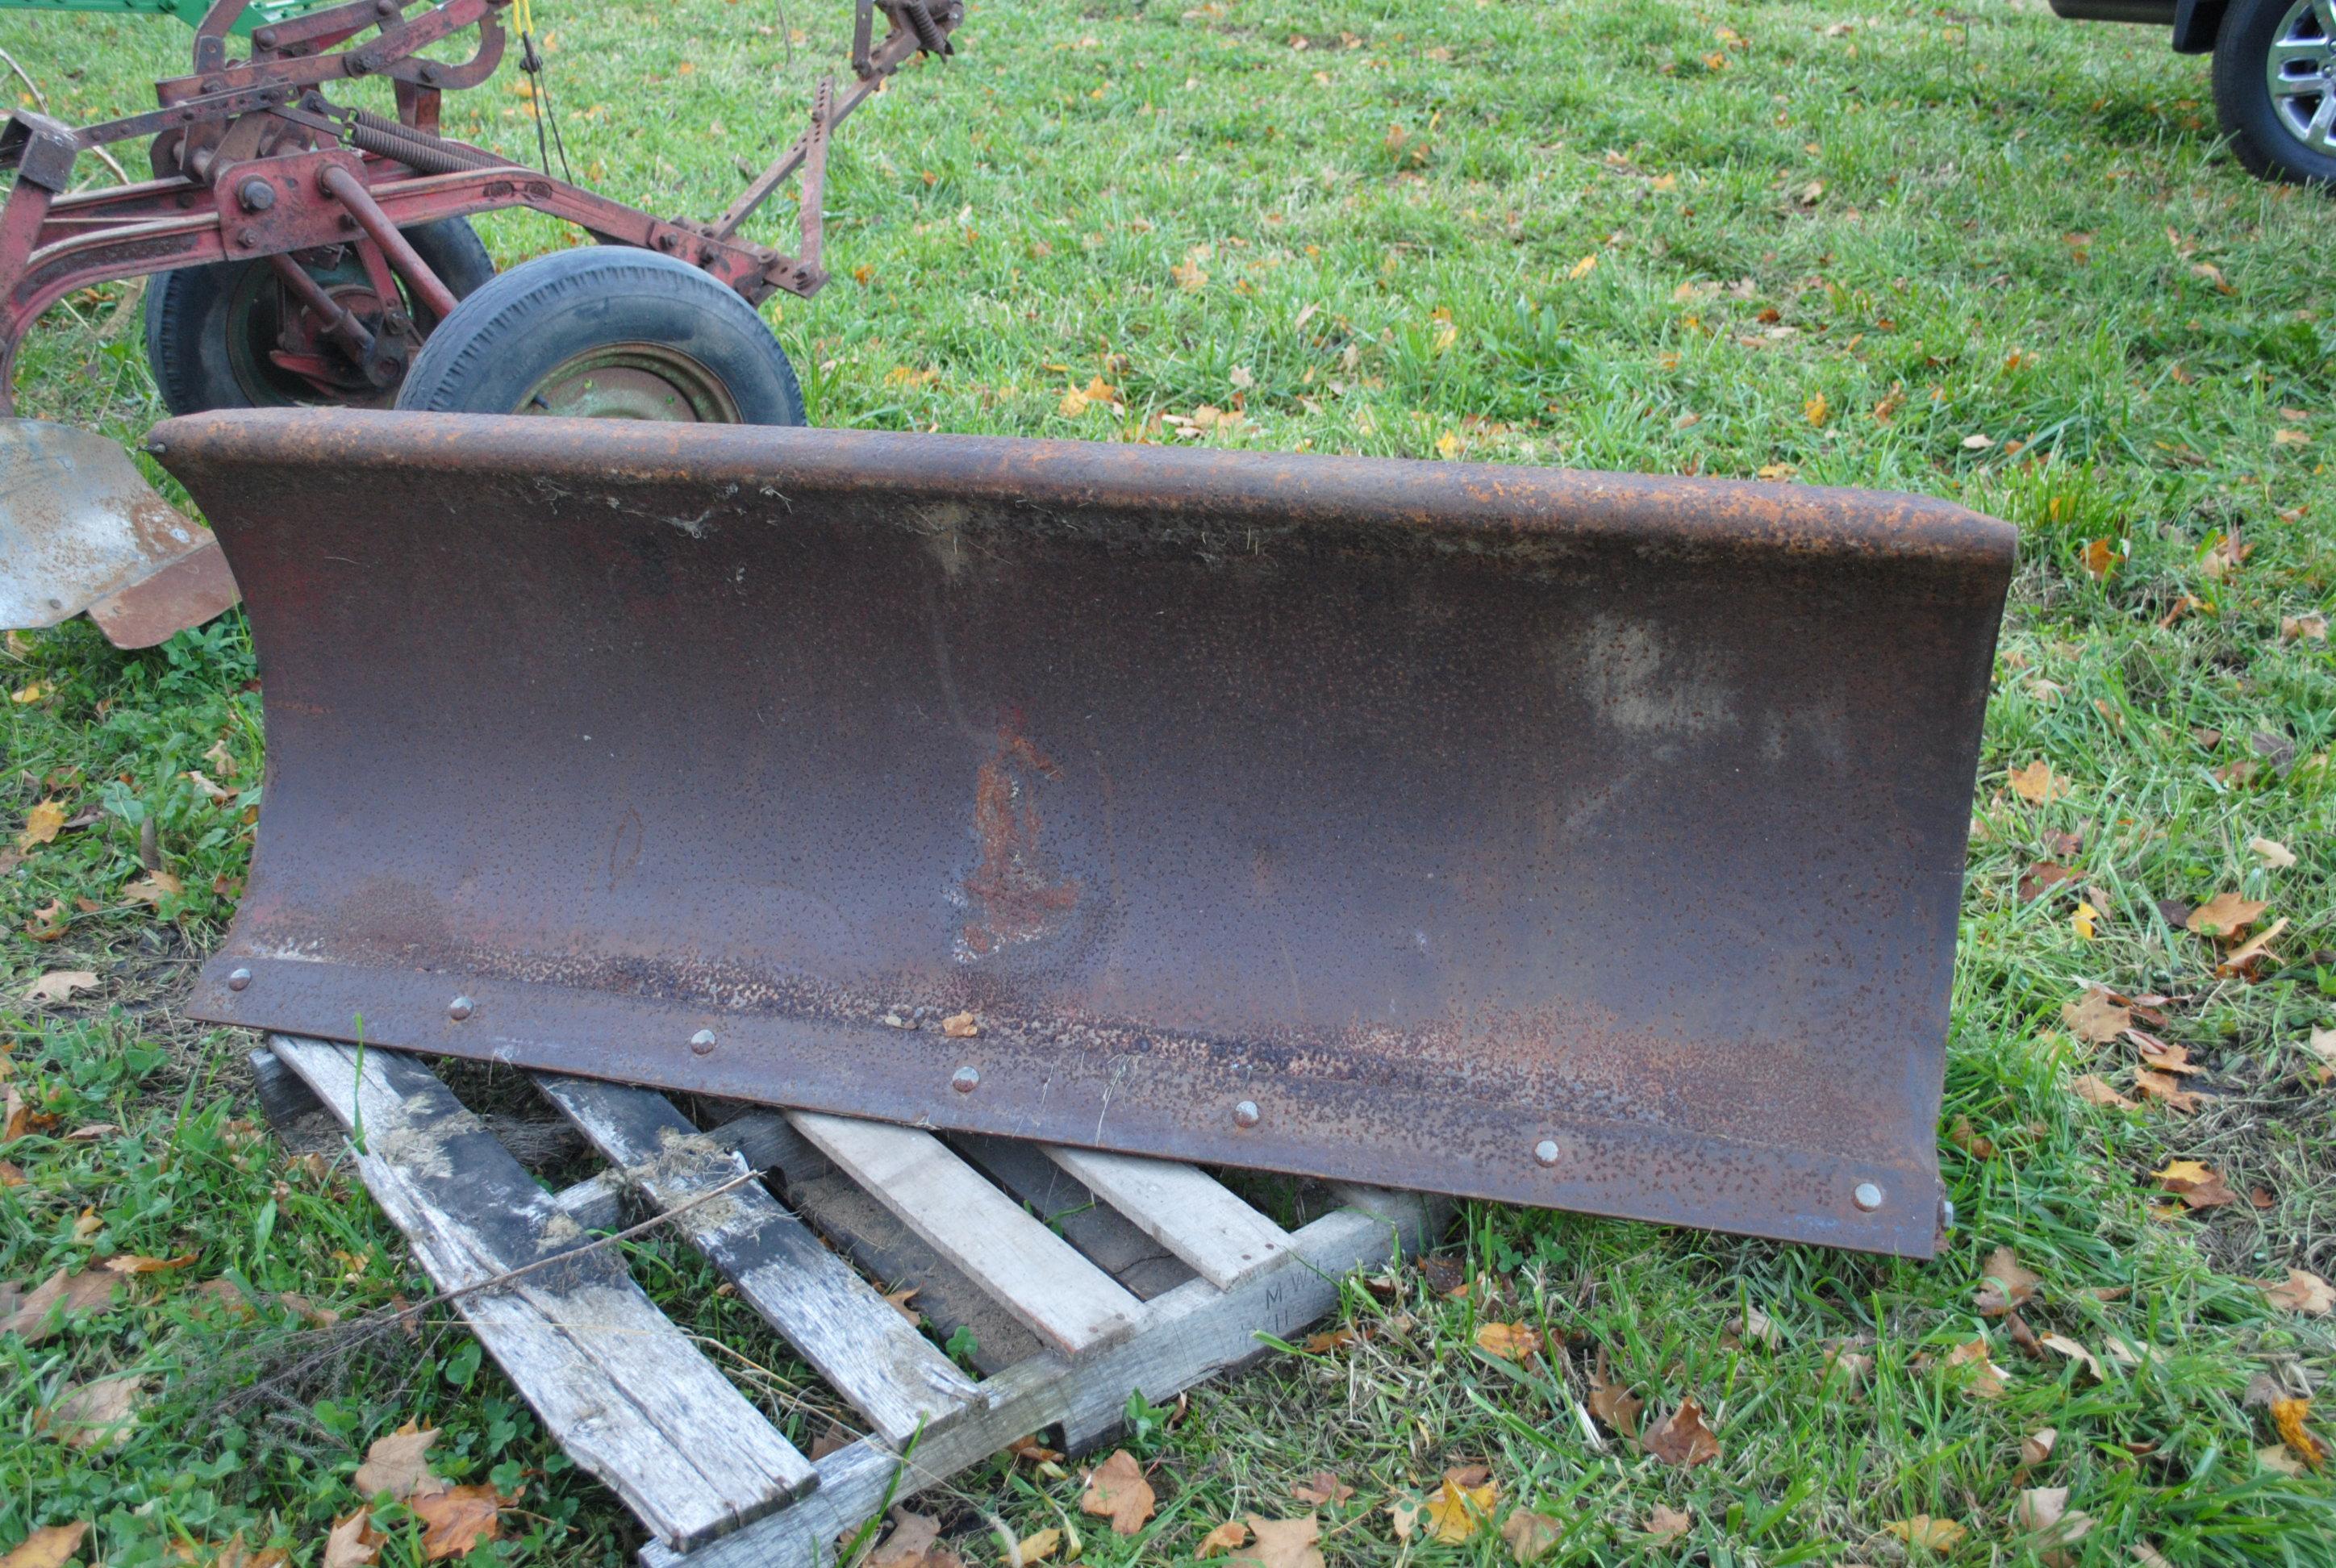 Farmall Super "C" with Artsway 72" belly mower, wide front, new rubber all around, wheel weights,